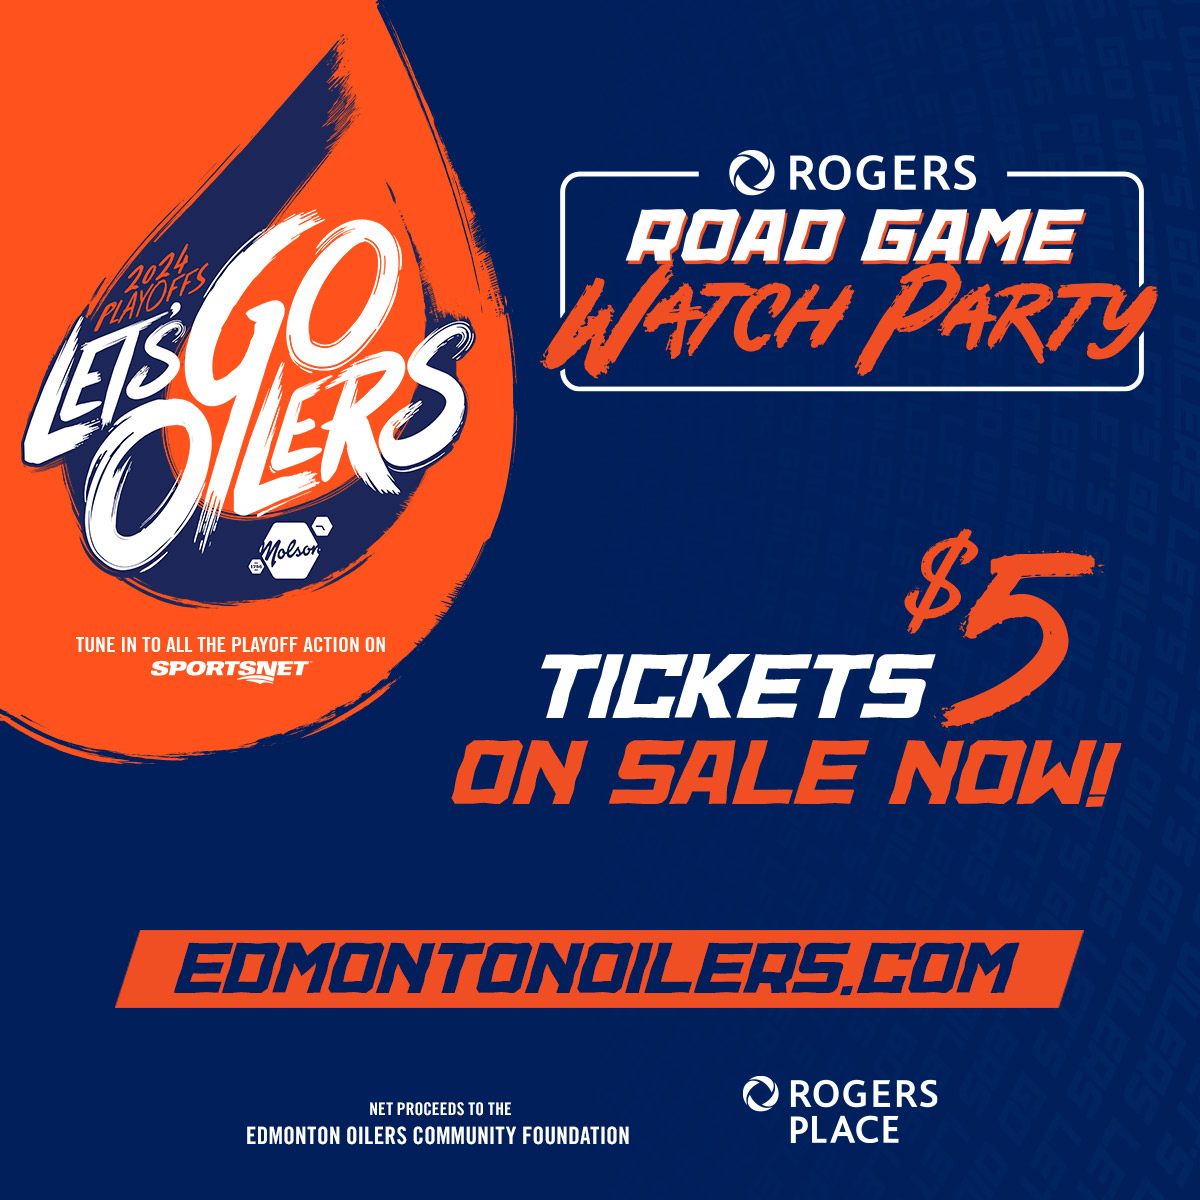 🧡💙 Tickets are ON SALE NOW for Games 1️⃣ & 2️⃣ of the @Rogers Road Game Watch Party at #RogersPlace!! Get your tickets now and cheer on your @EdmontonOilers in the Western Conference Final! 🎫: RogersPlace.com/WatchParty ℹ️: EdmontonOilers.com/WatchParty